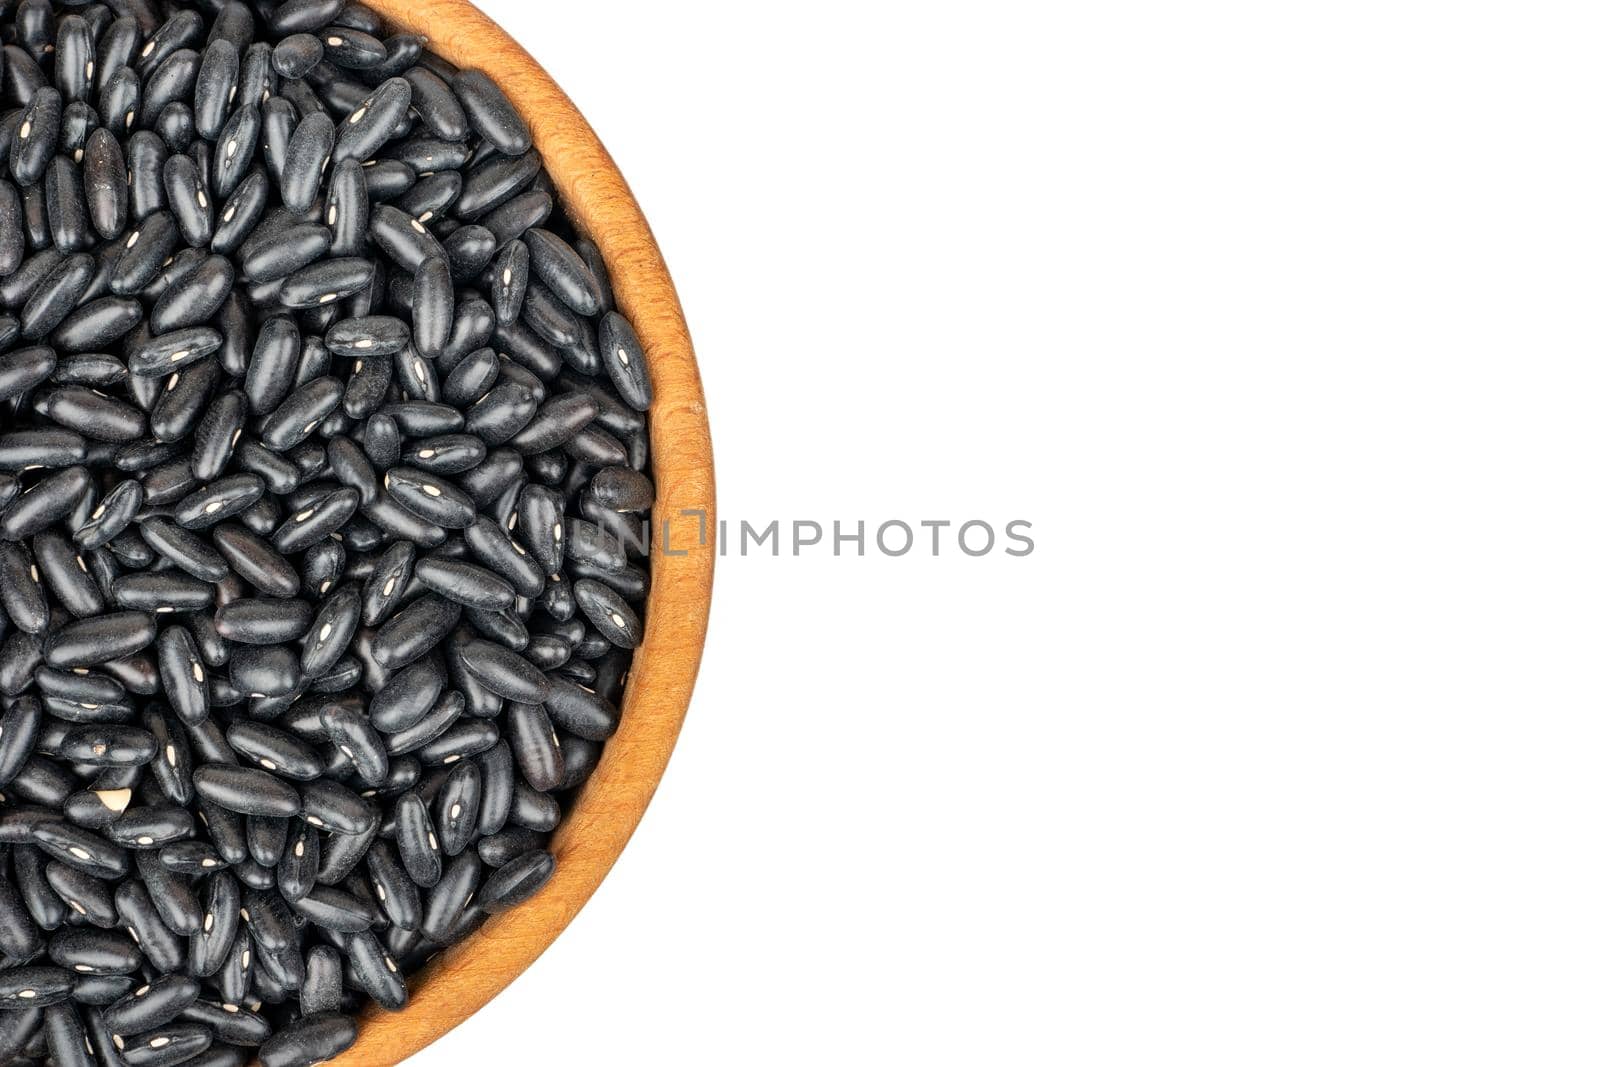 Part of a bowl of black beans on a white background close-up